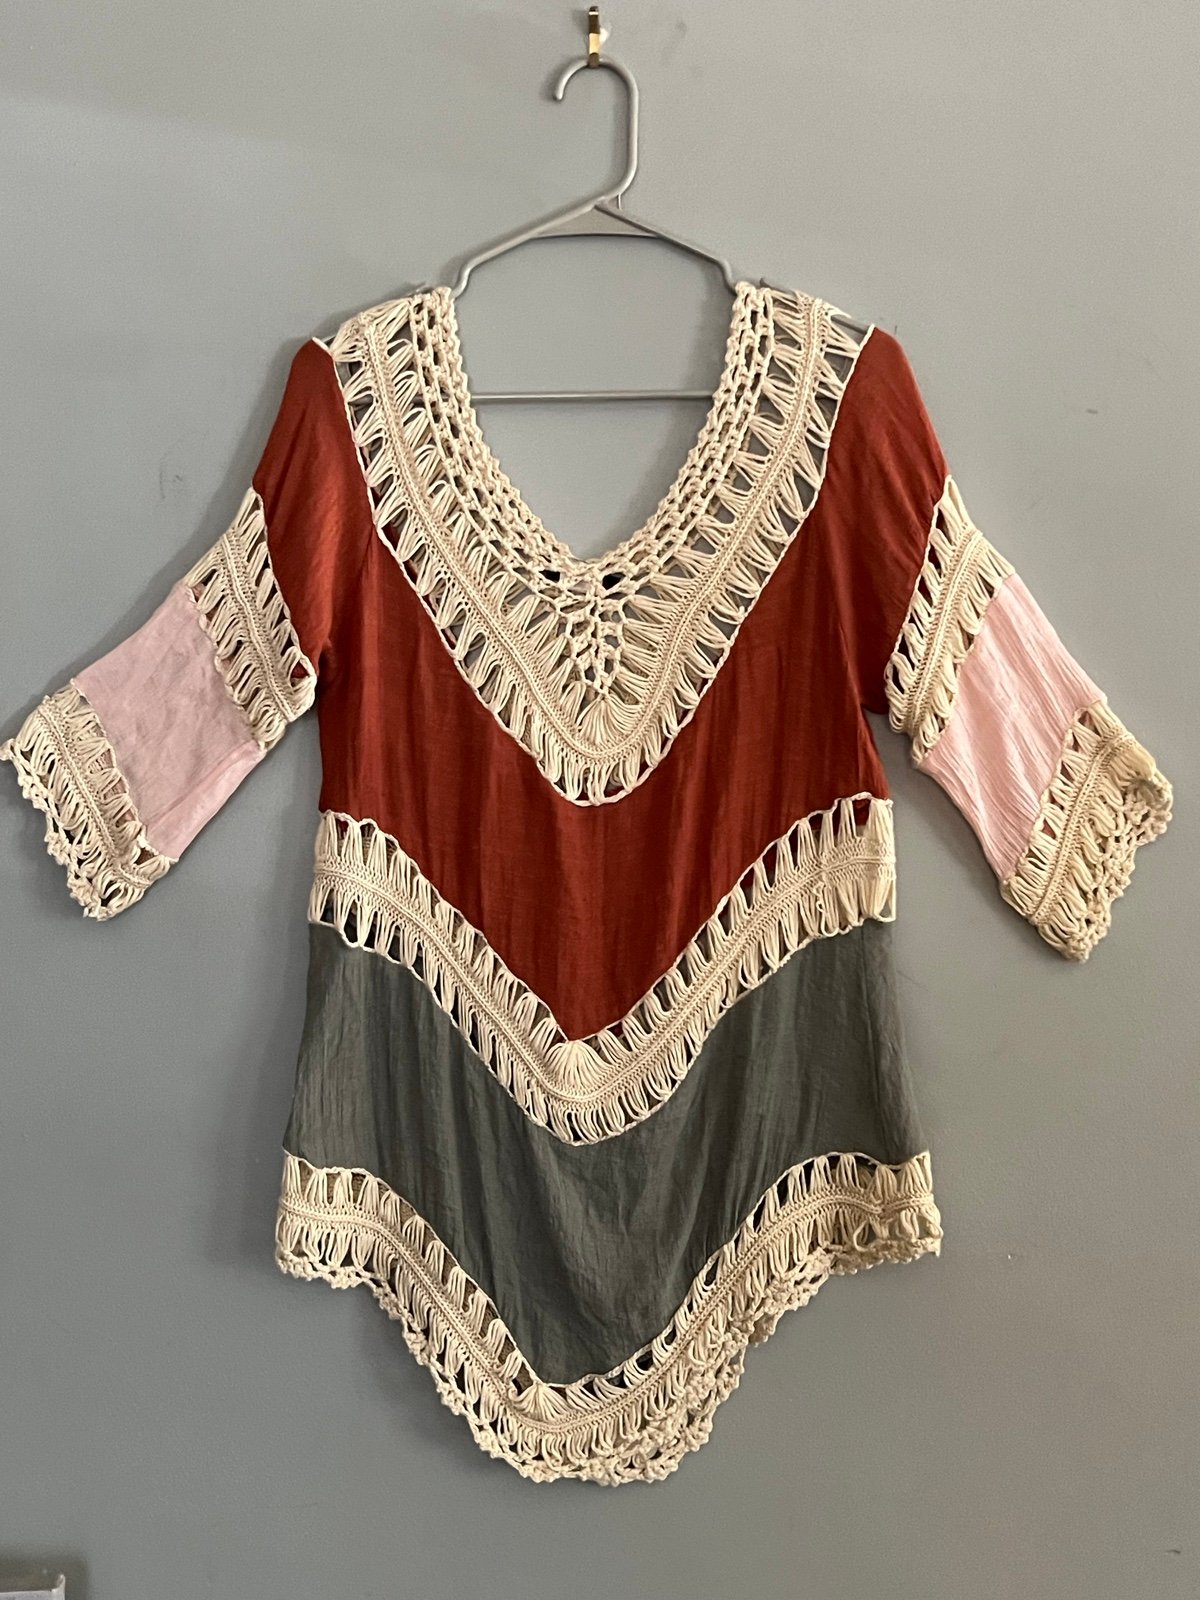 Elegant Boho Crochet Cover Up Tunic gfPfEZOEj just for you